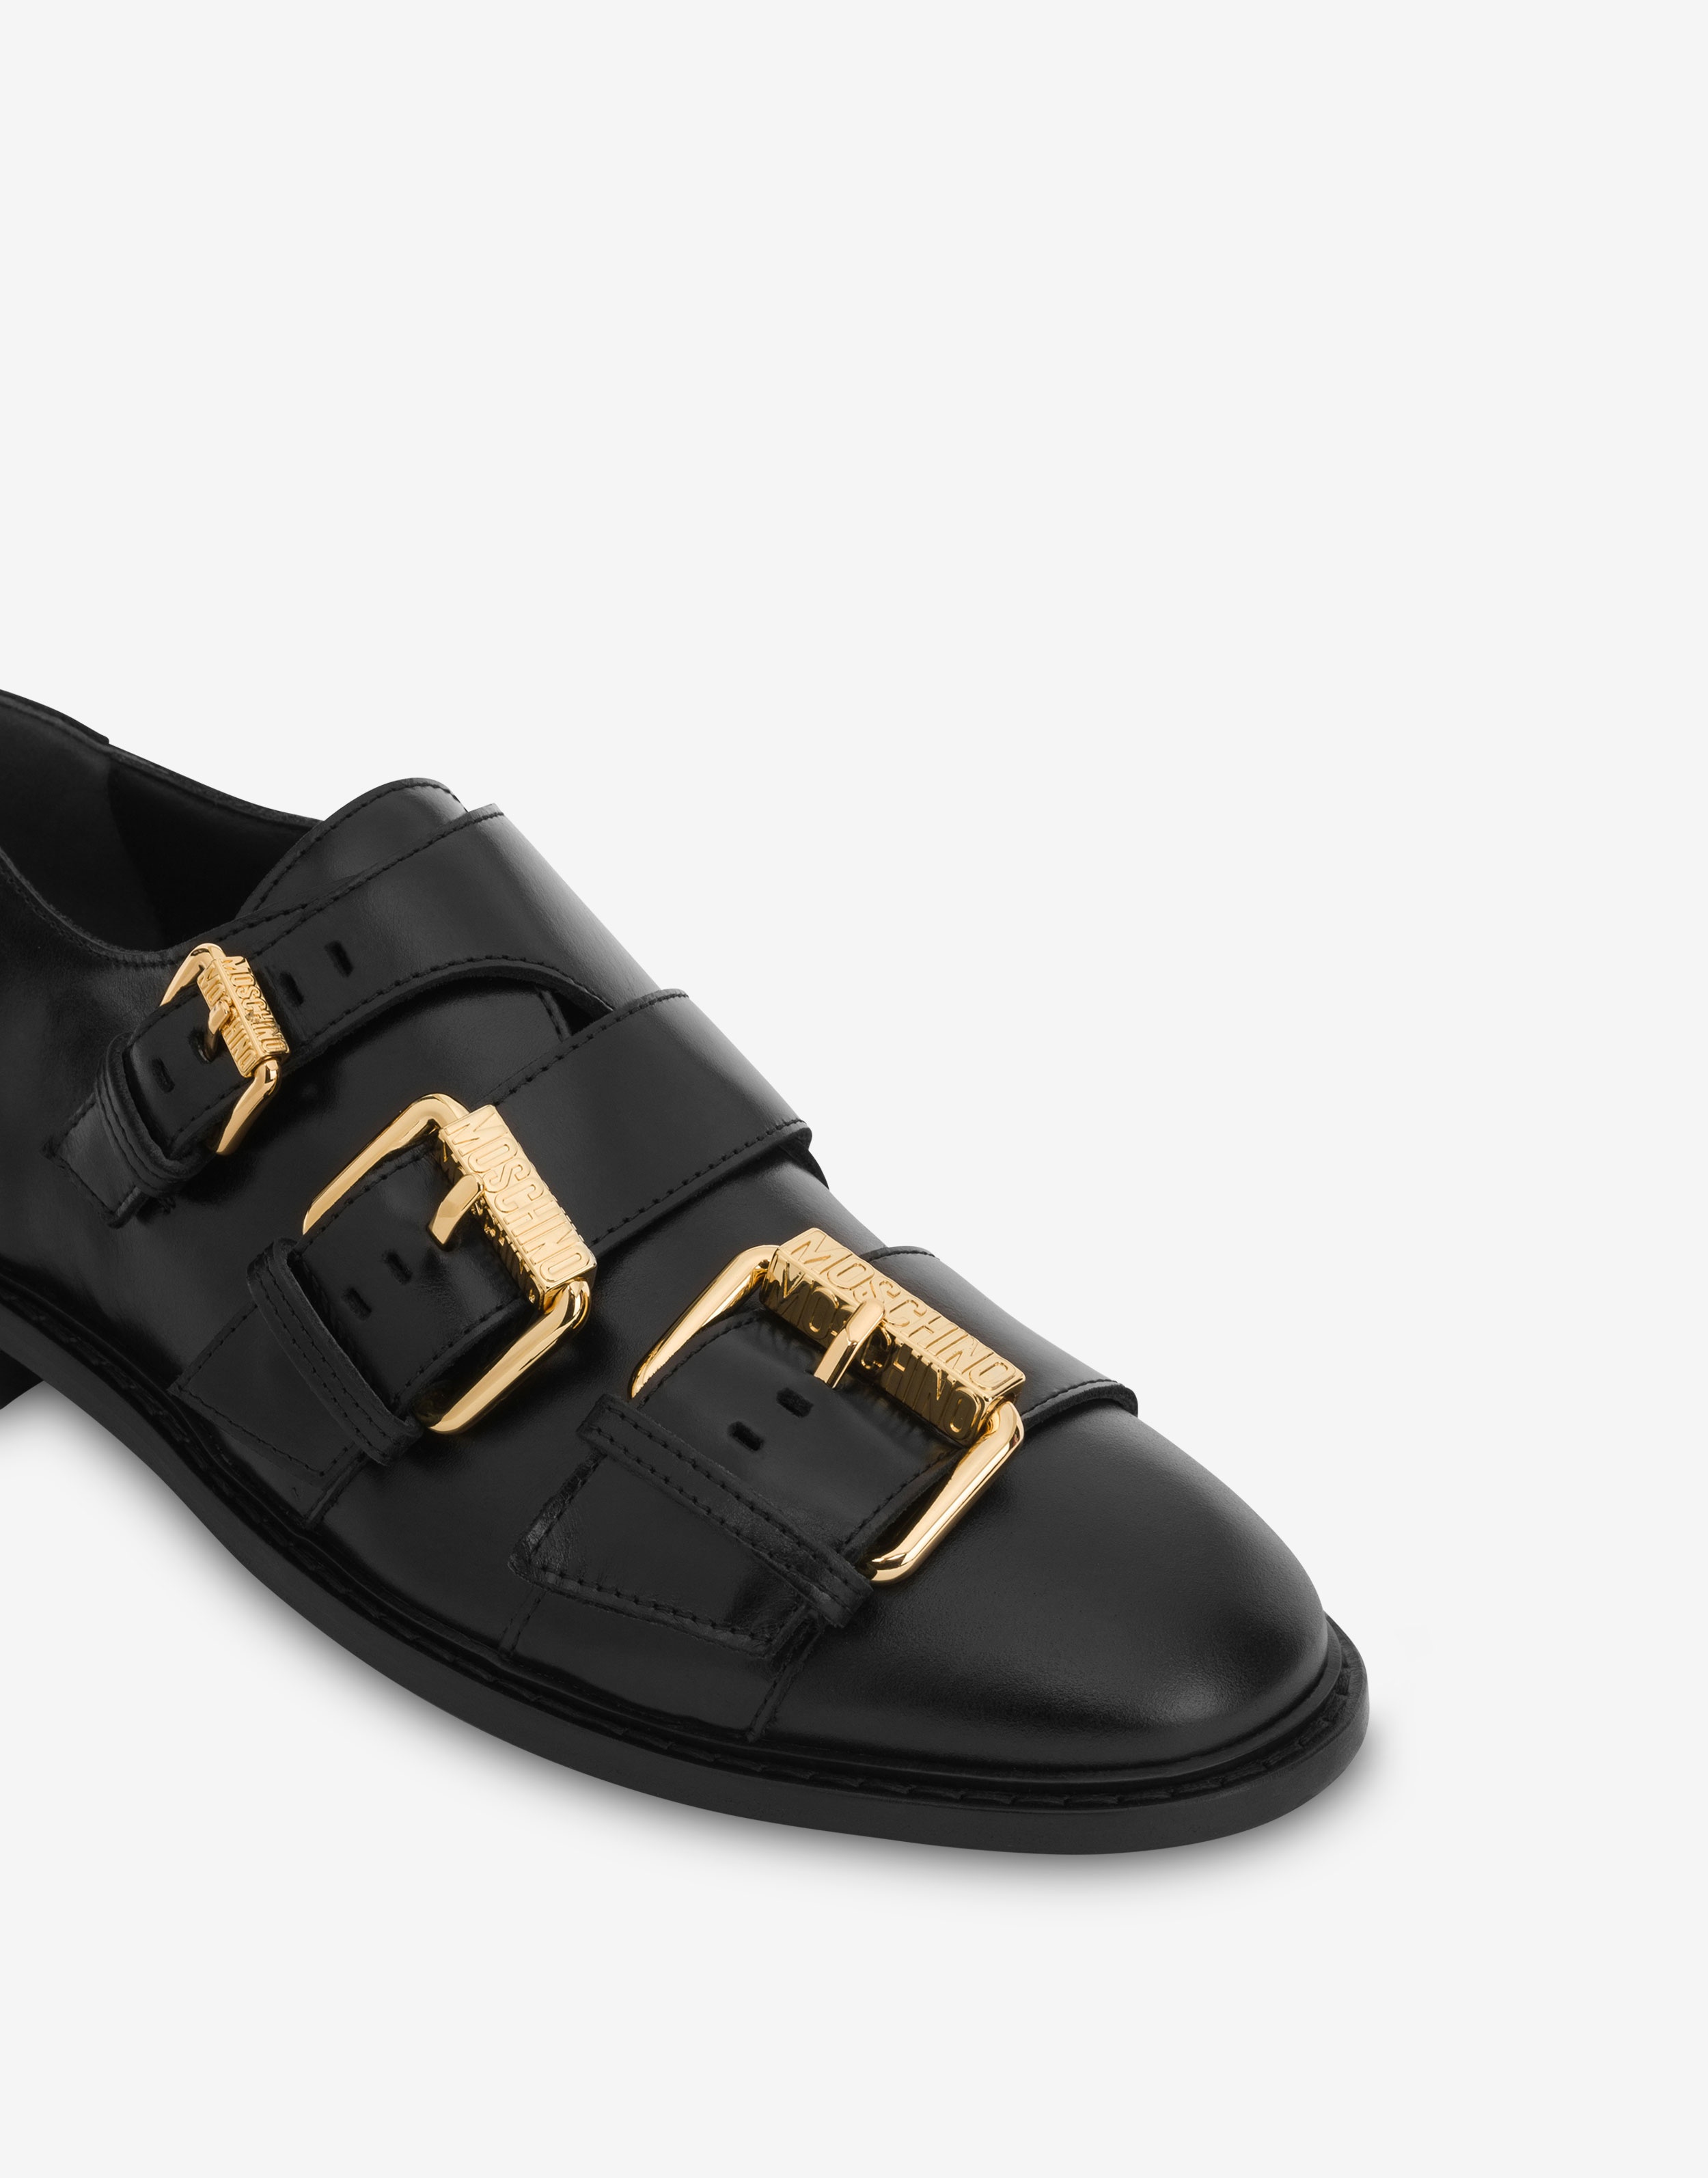 MULTI BUCKLES SHINY CALFSKIN LOAFERS - 4